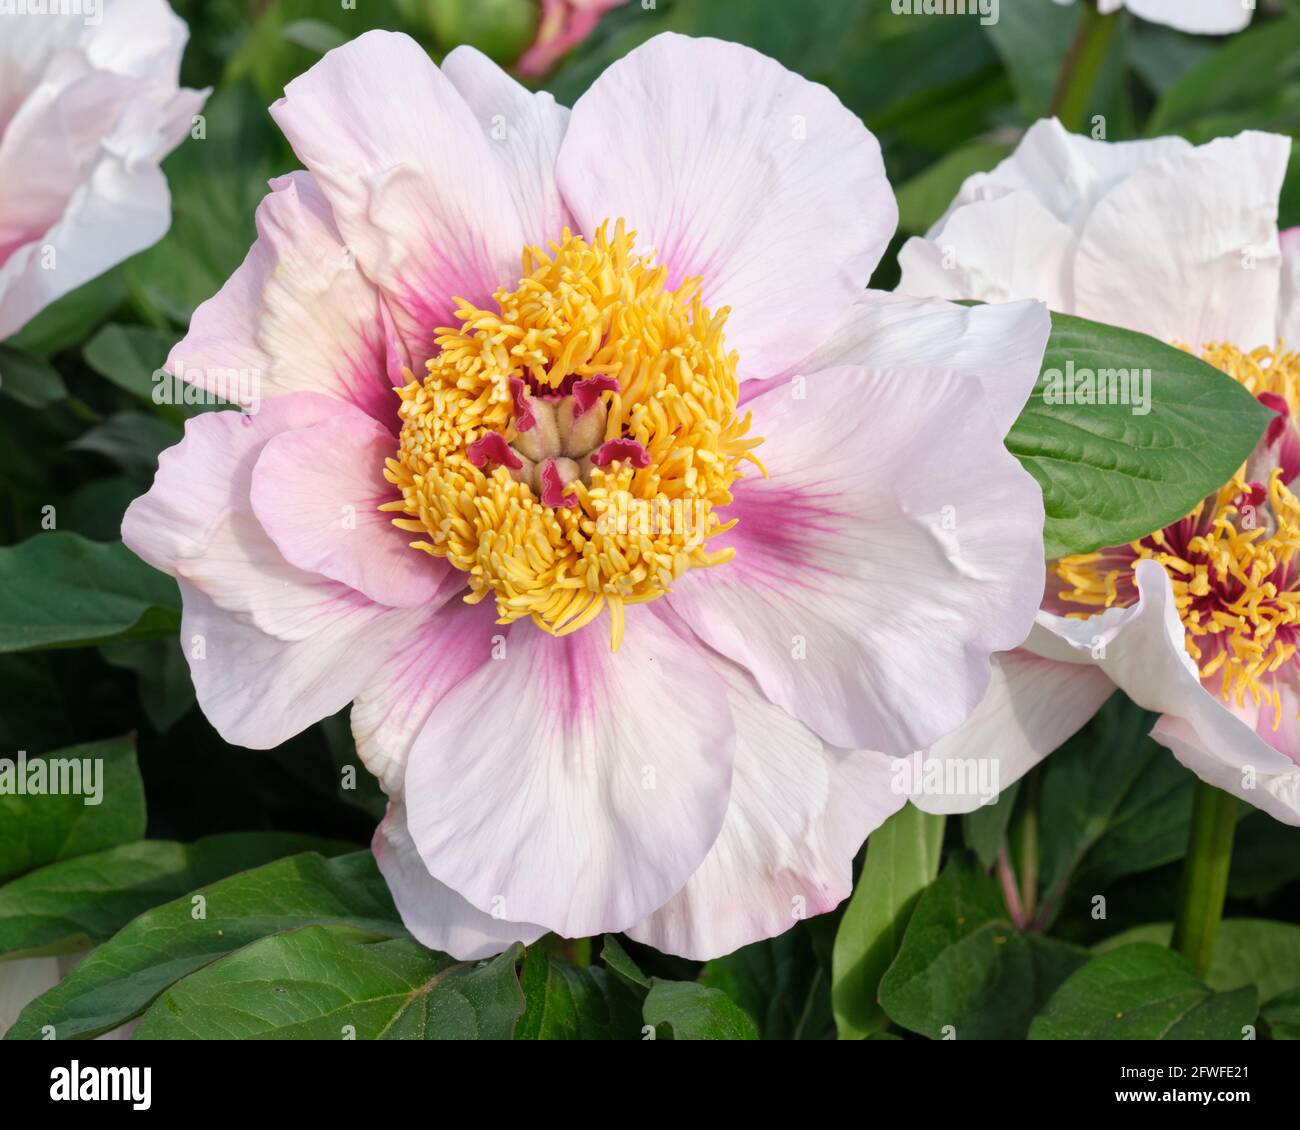 Blooming flower of a Peony, latin Paeonia.  Specific species named "Halcyon" from the A.P. Saunders Collection Stock Photo